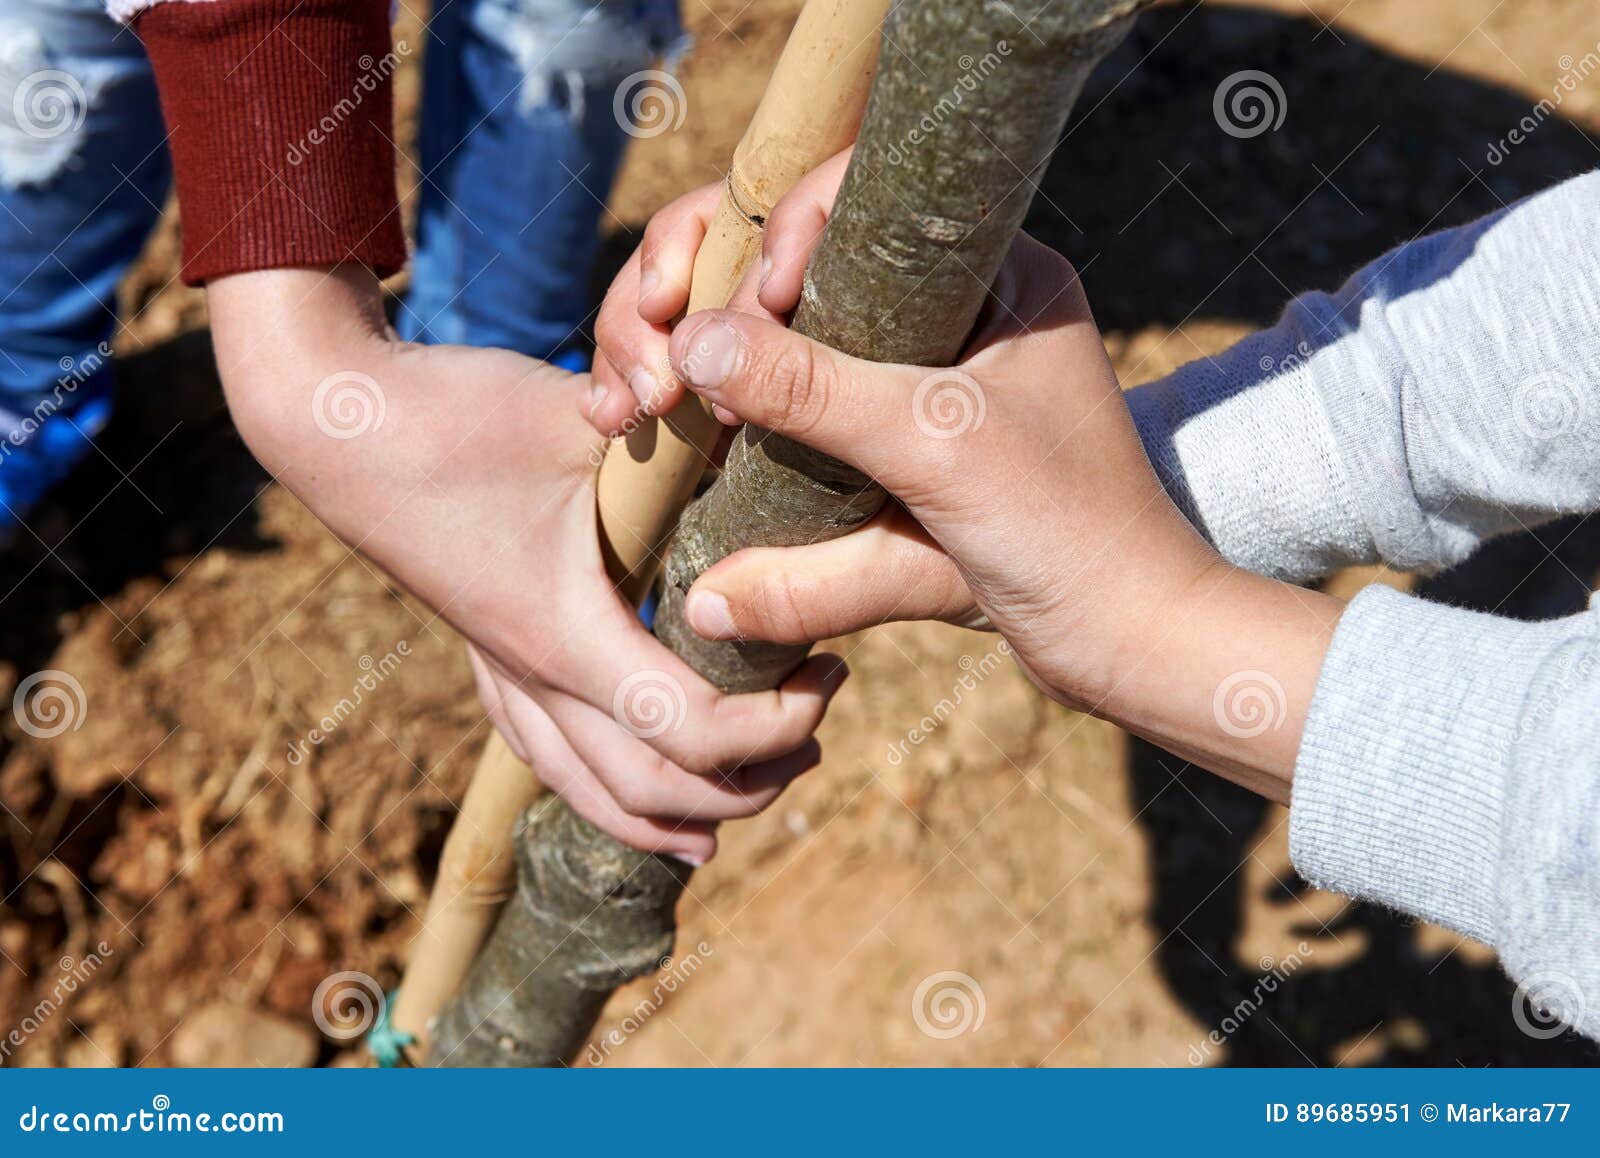 children holding a bole during tree planting.